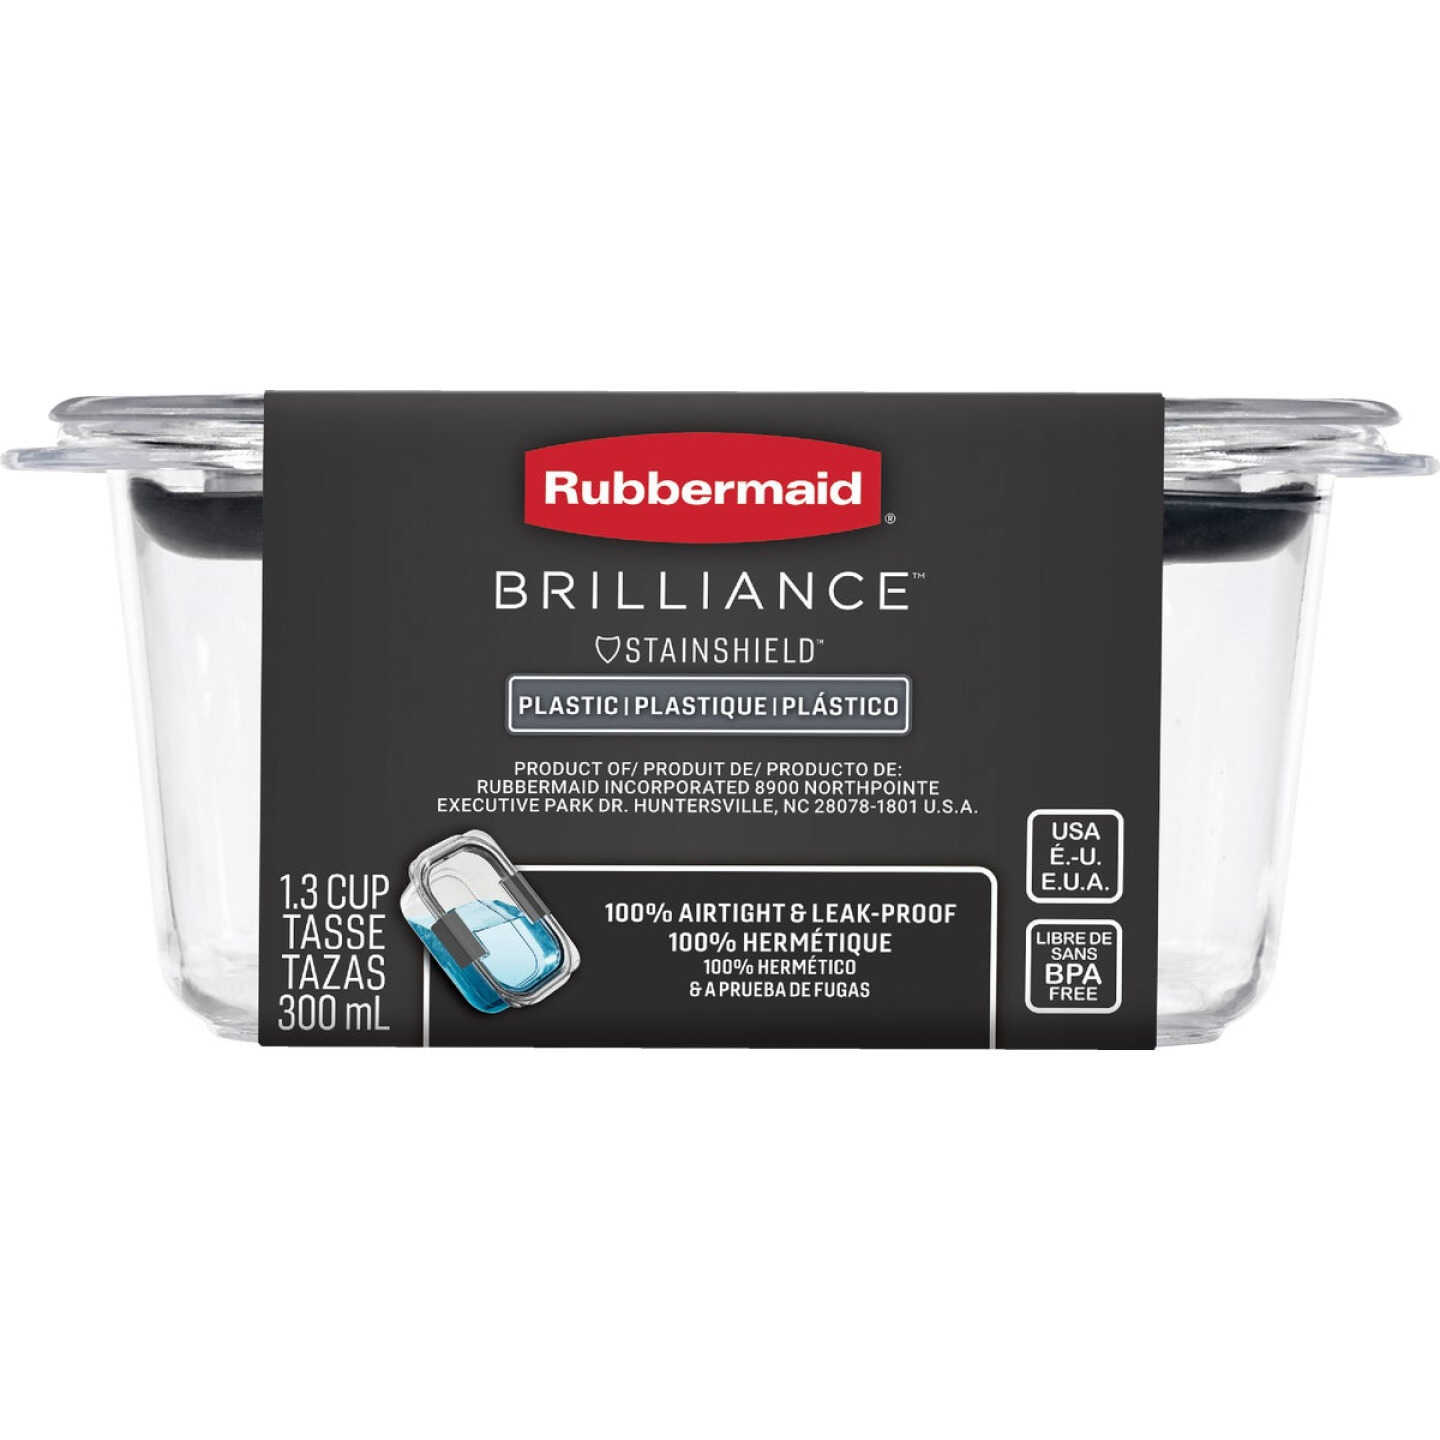 Rubbermaid Brilliance Storage Containers Review